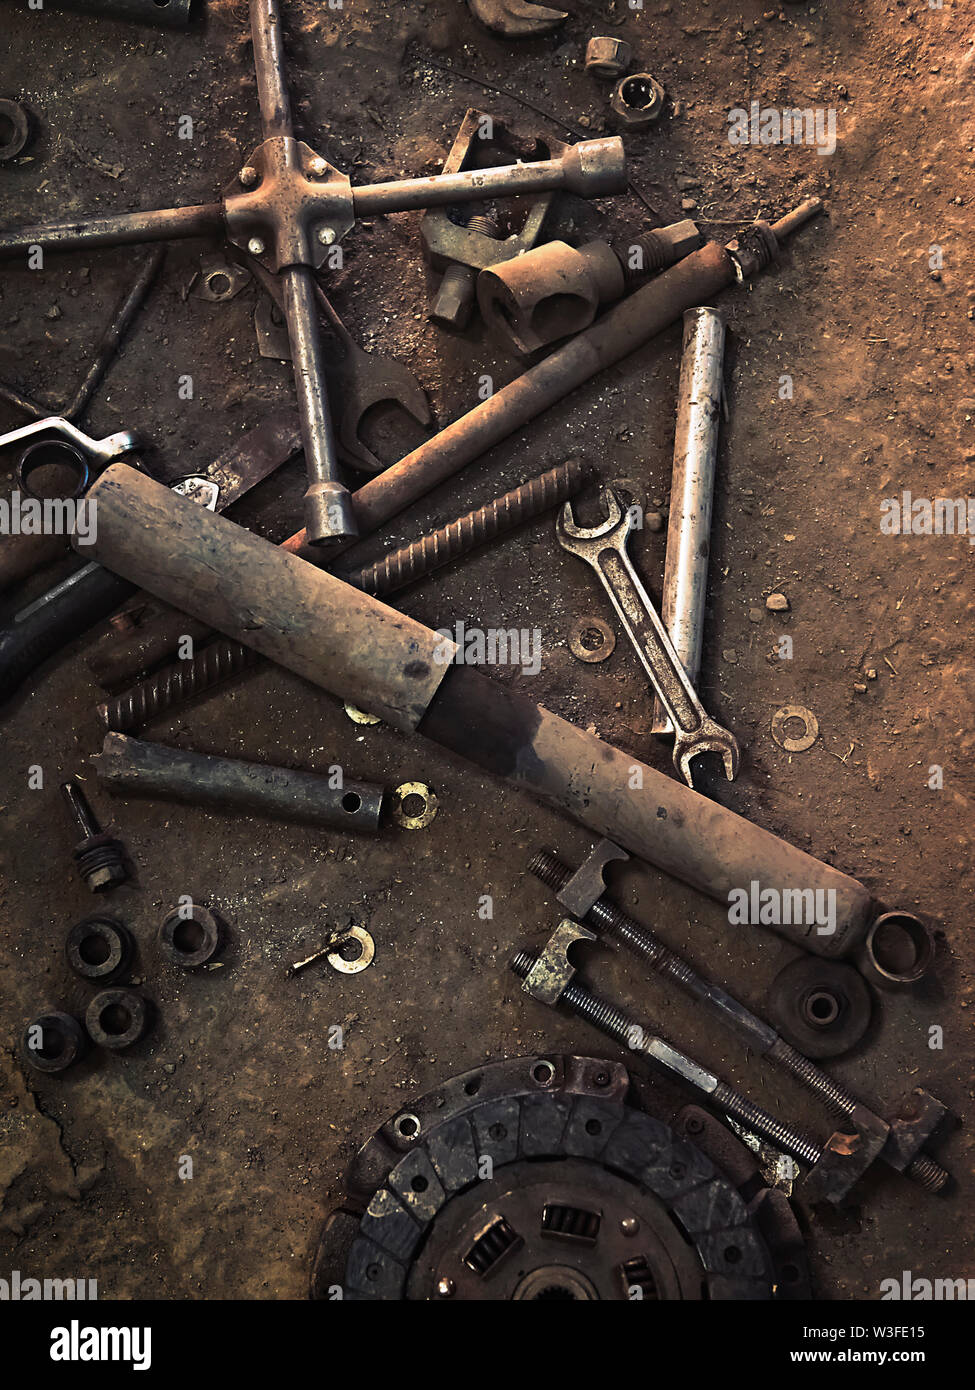 old parts and tools on the workshop floor Stock Photo